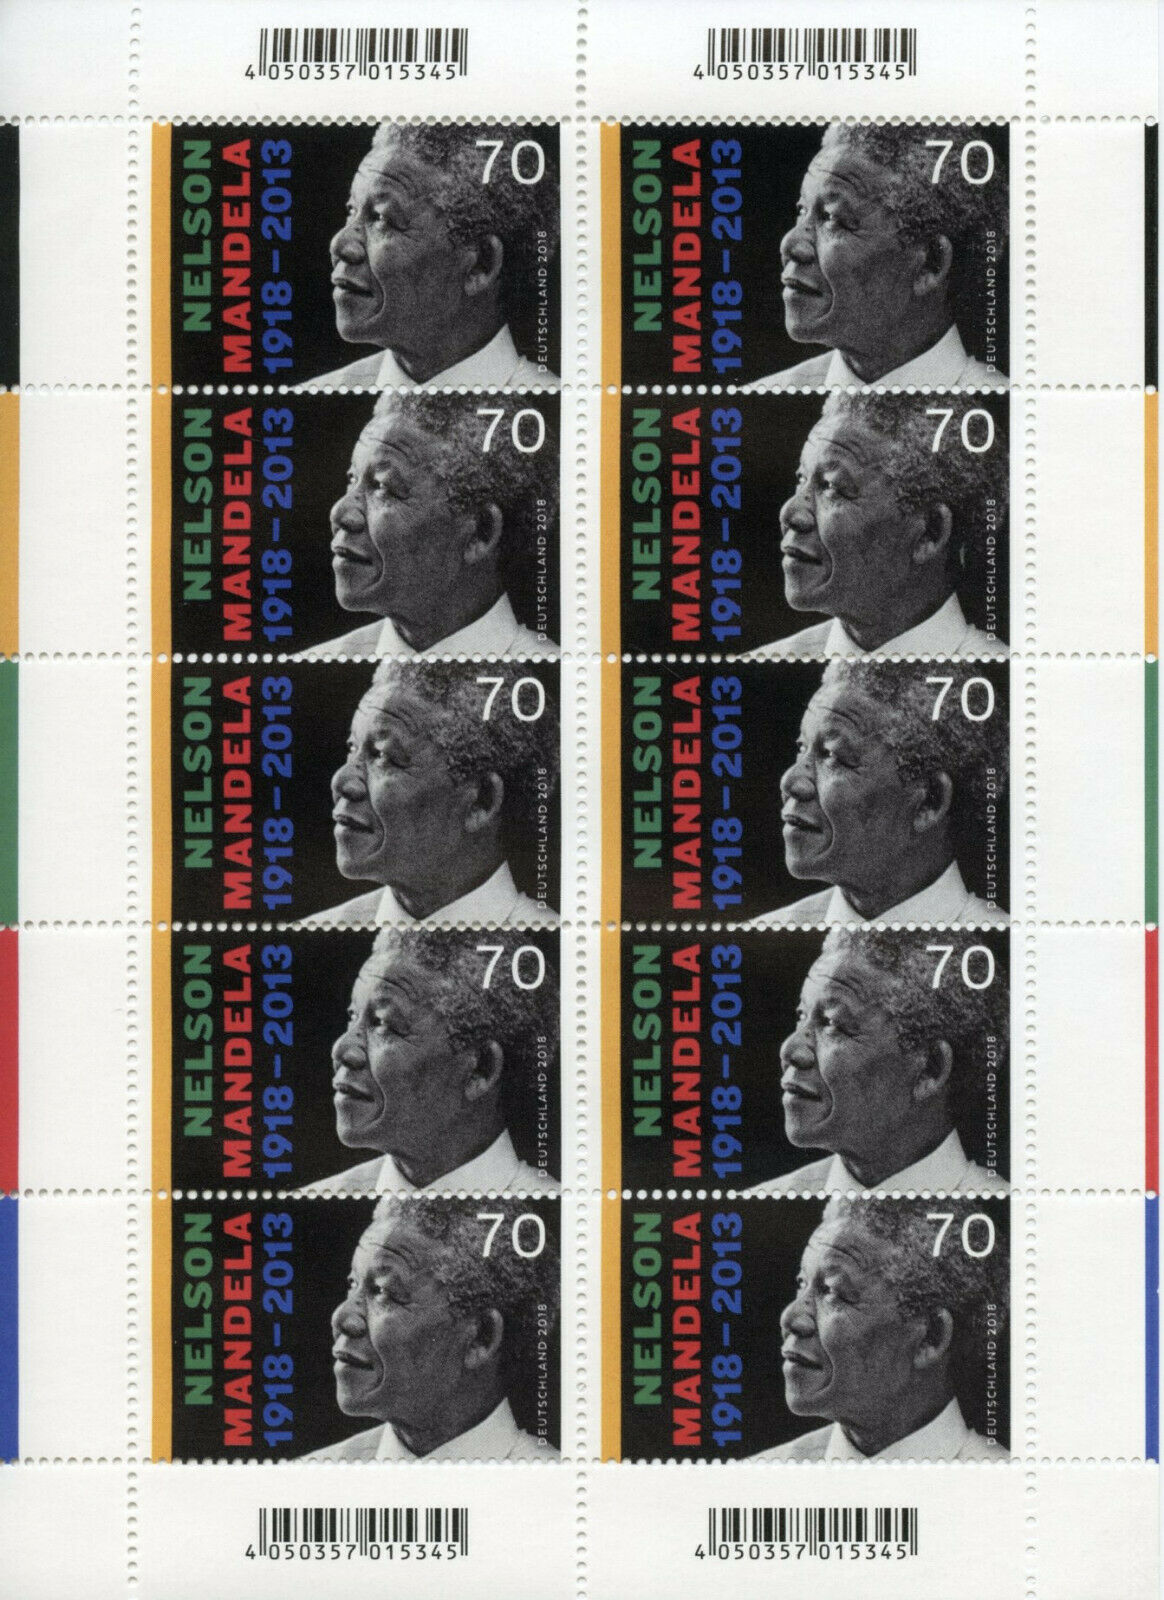 Germany Famous People Stamps 2018 MNH Nelson Mandela JIS South Africa 10v M/S